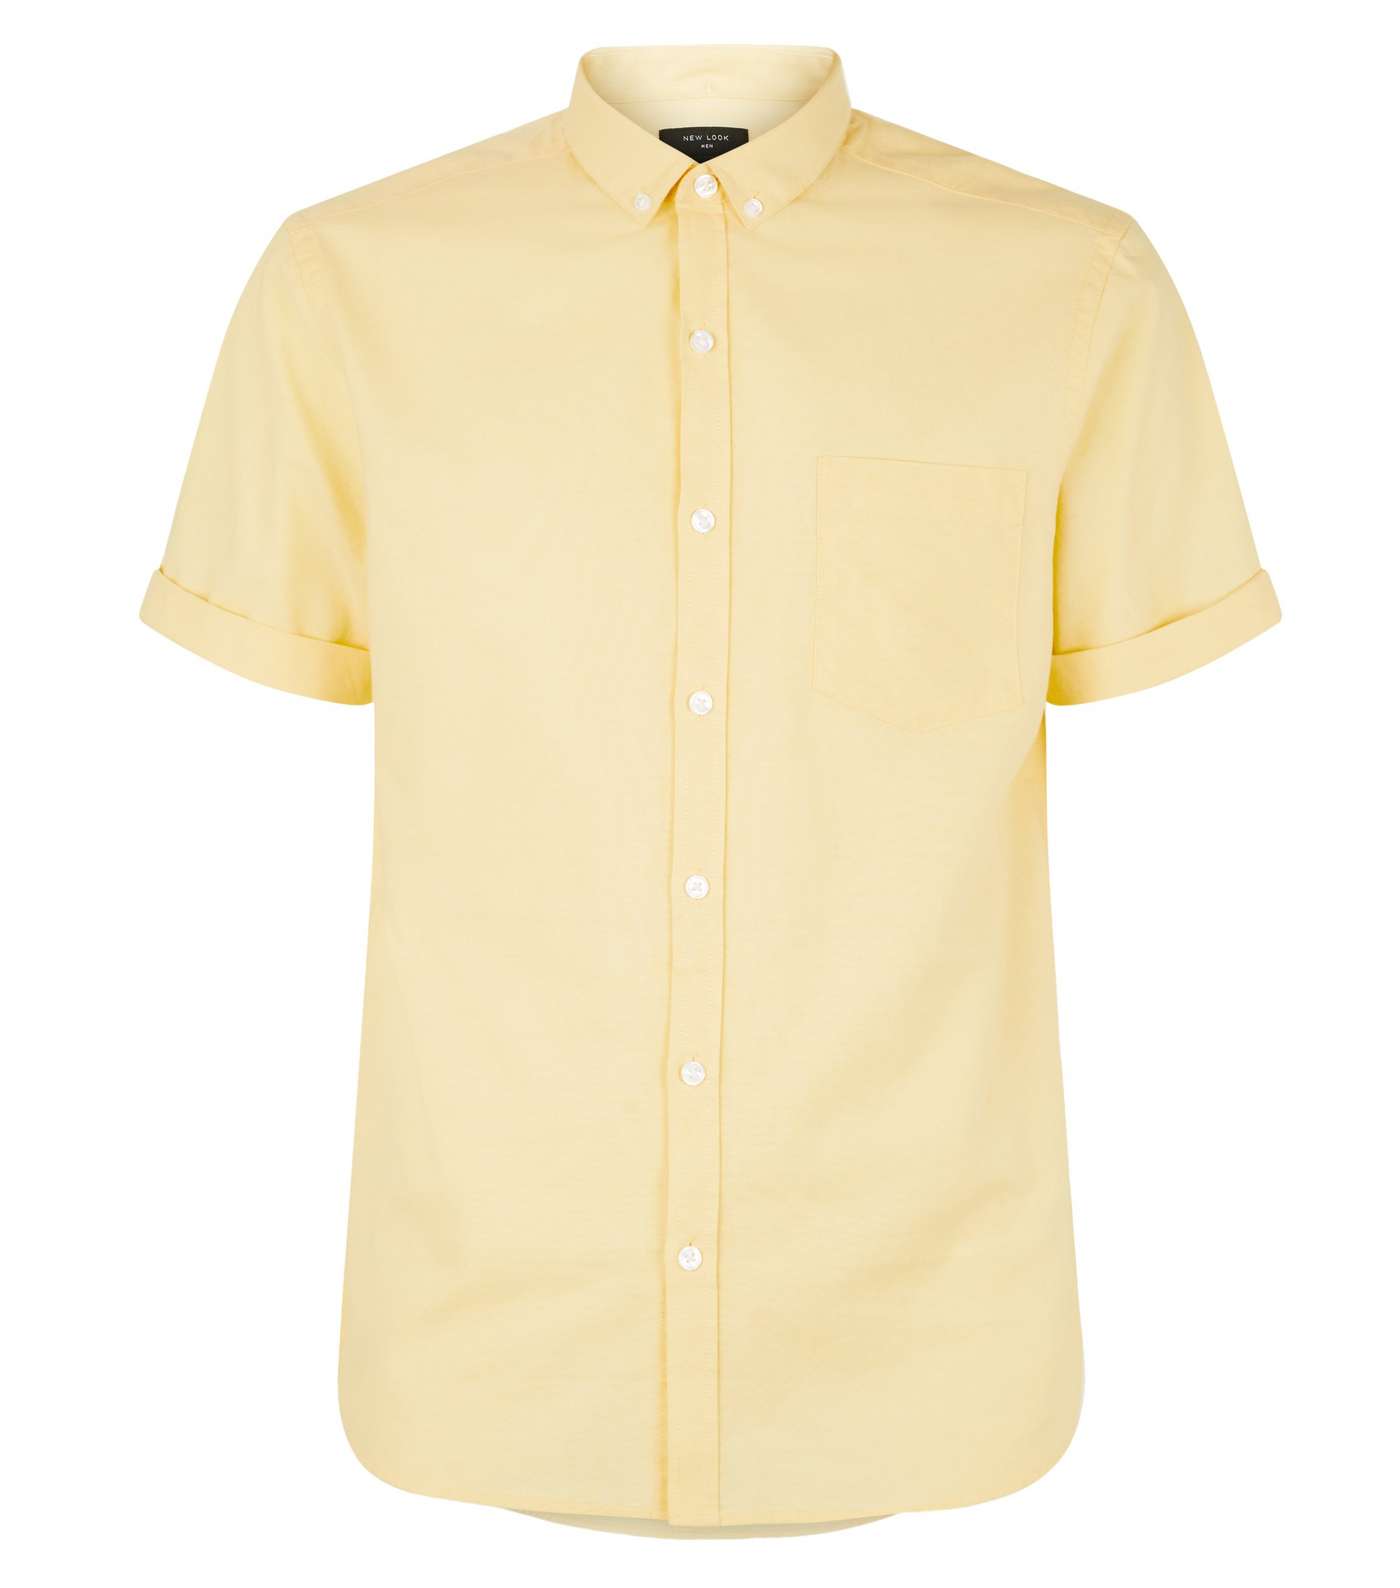 Pale Yellow Cotton Short Sleeve Oxford Shirt Image 5